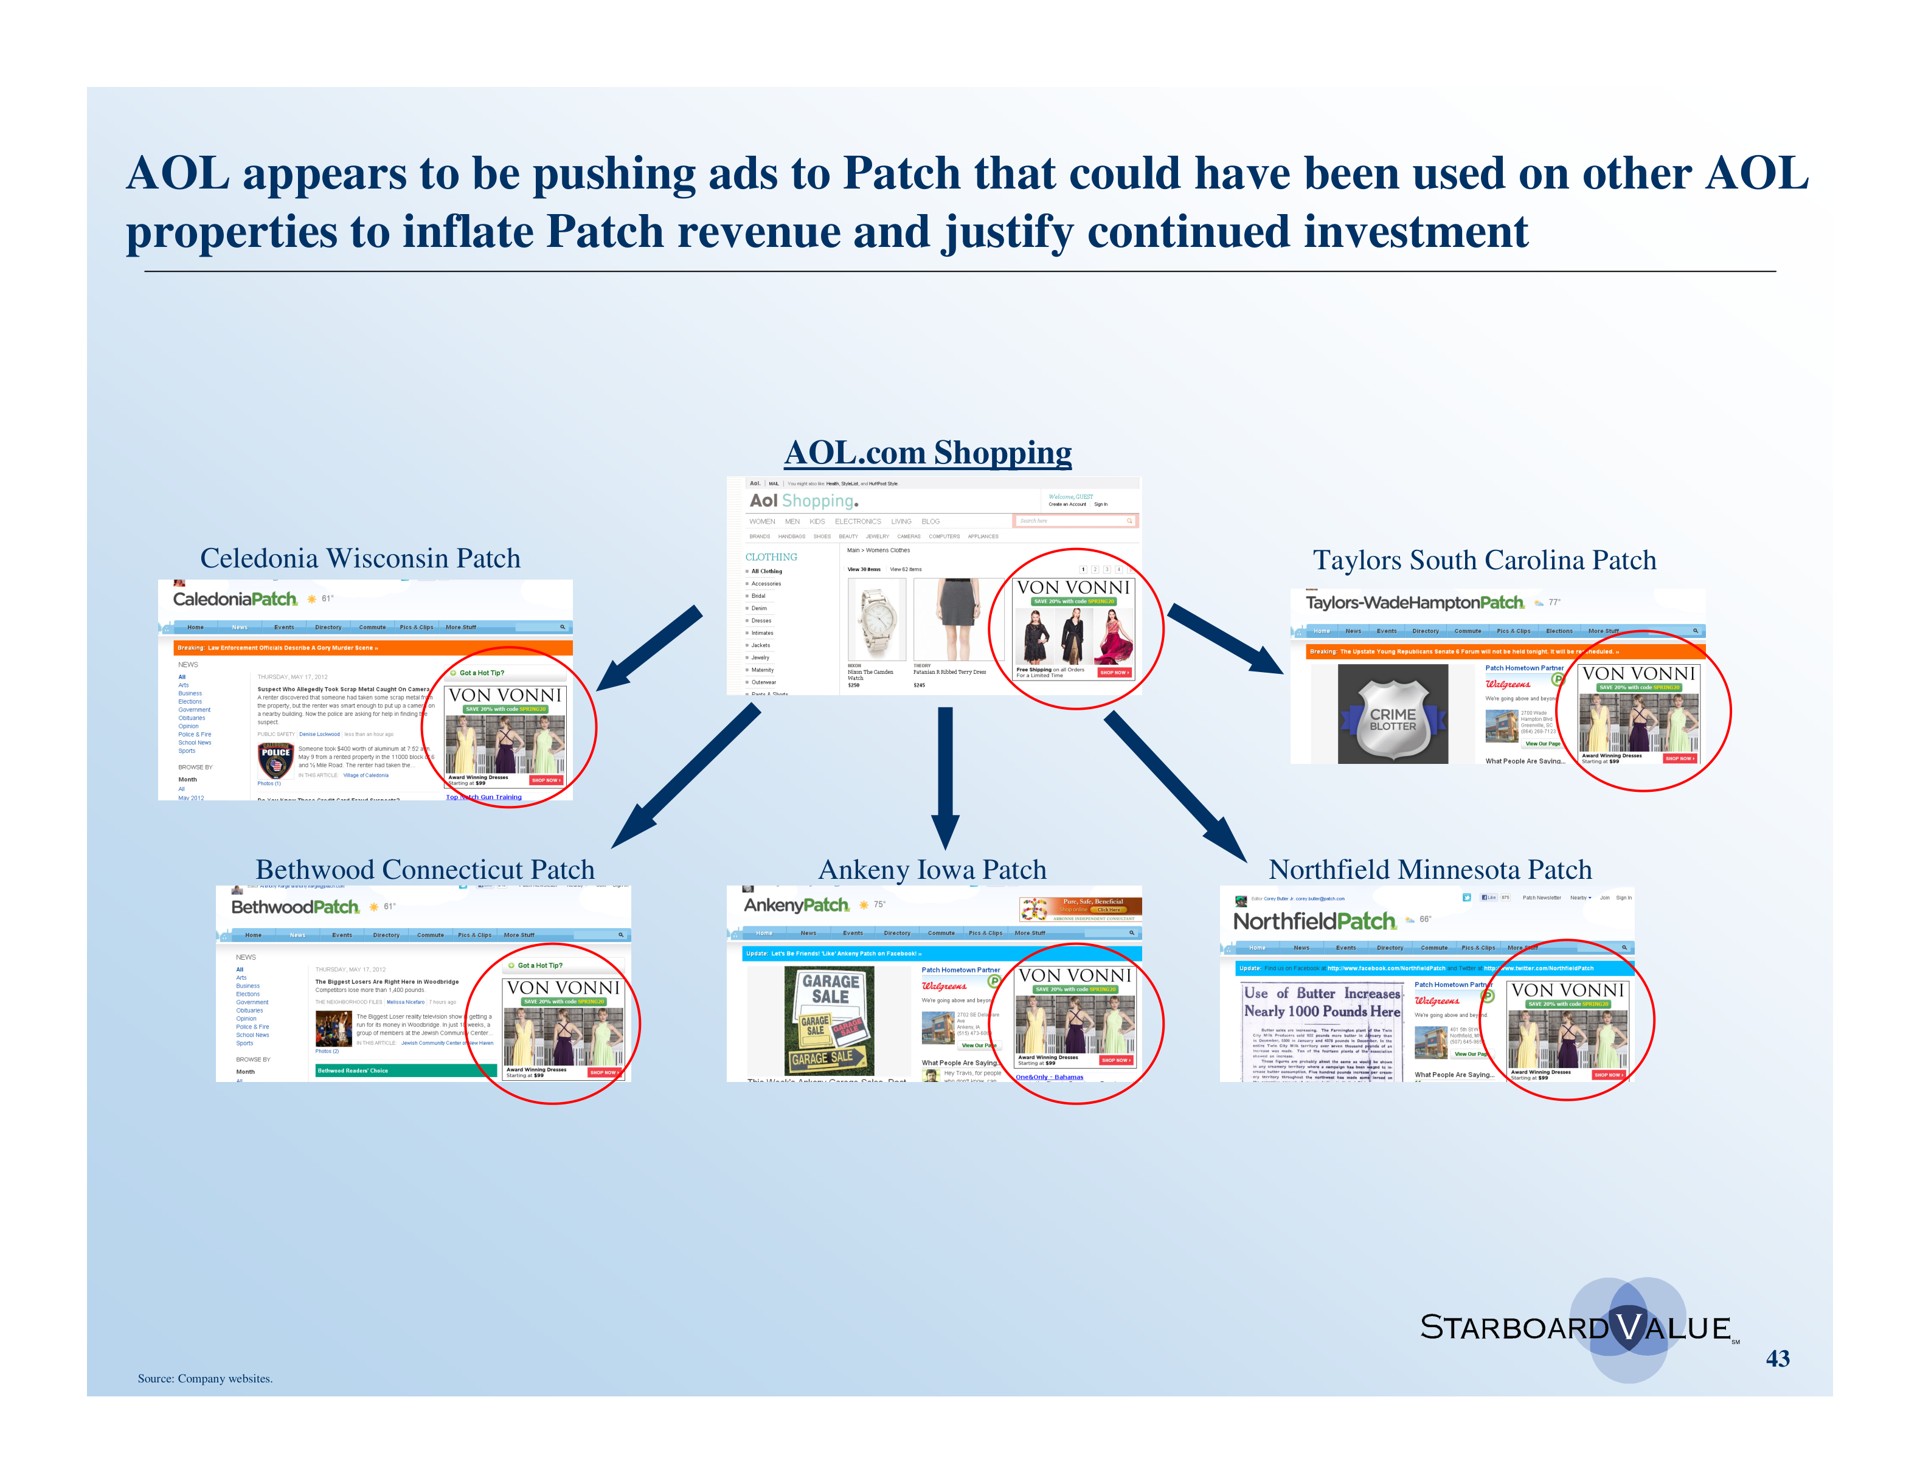 appears to be pushing ads to patch that could have been used on other properties to inflate patch revenue and justify continued investment | Starboard Value